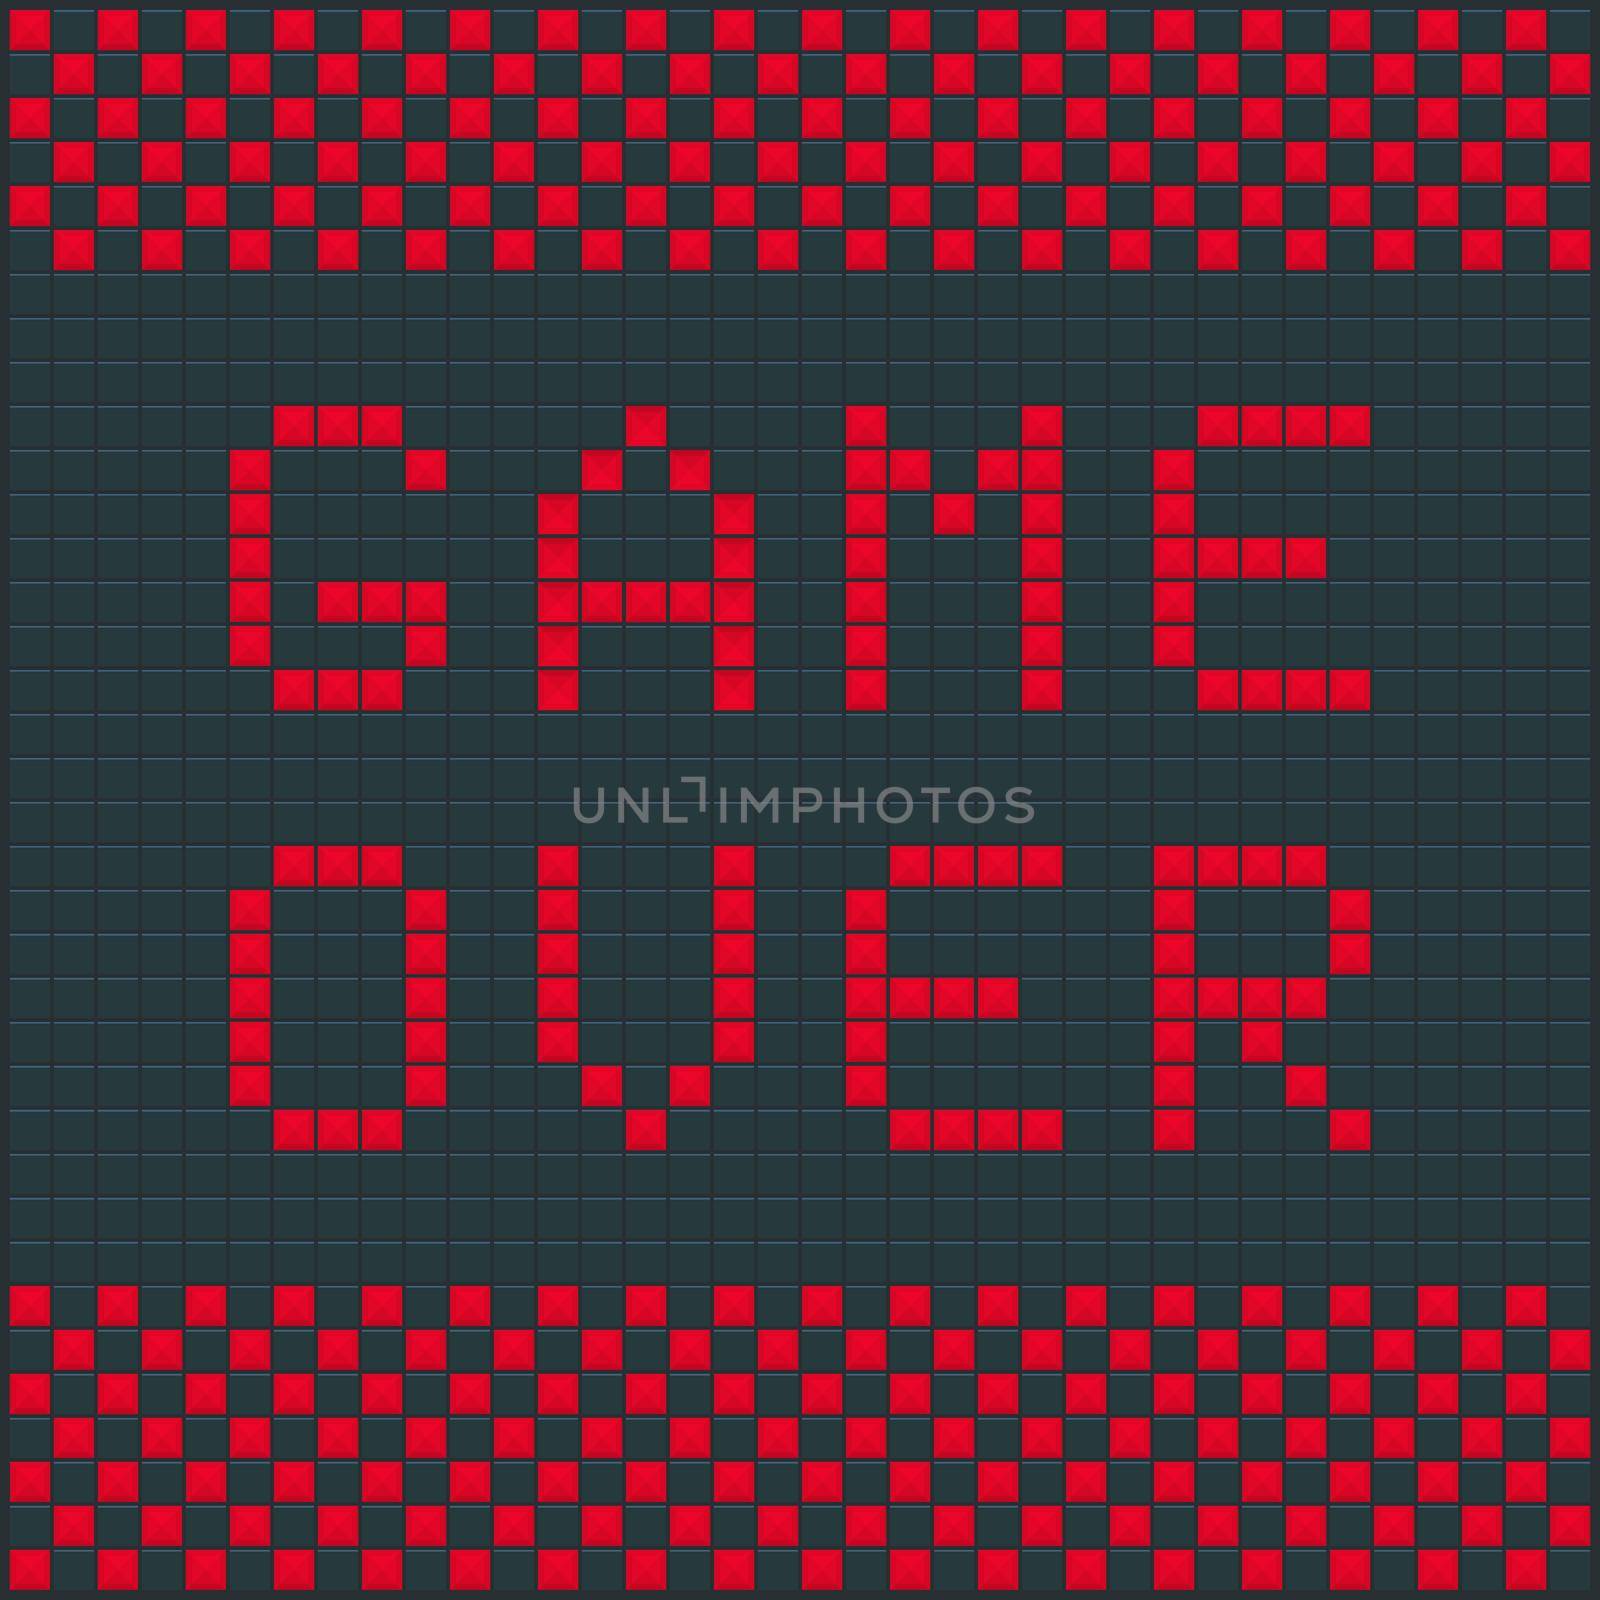 Game over. Old video game square template. Brick game pieces. Vector illustration.